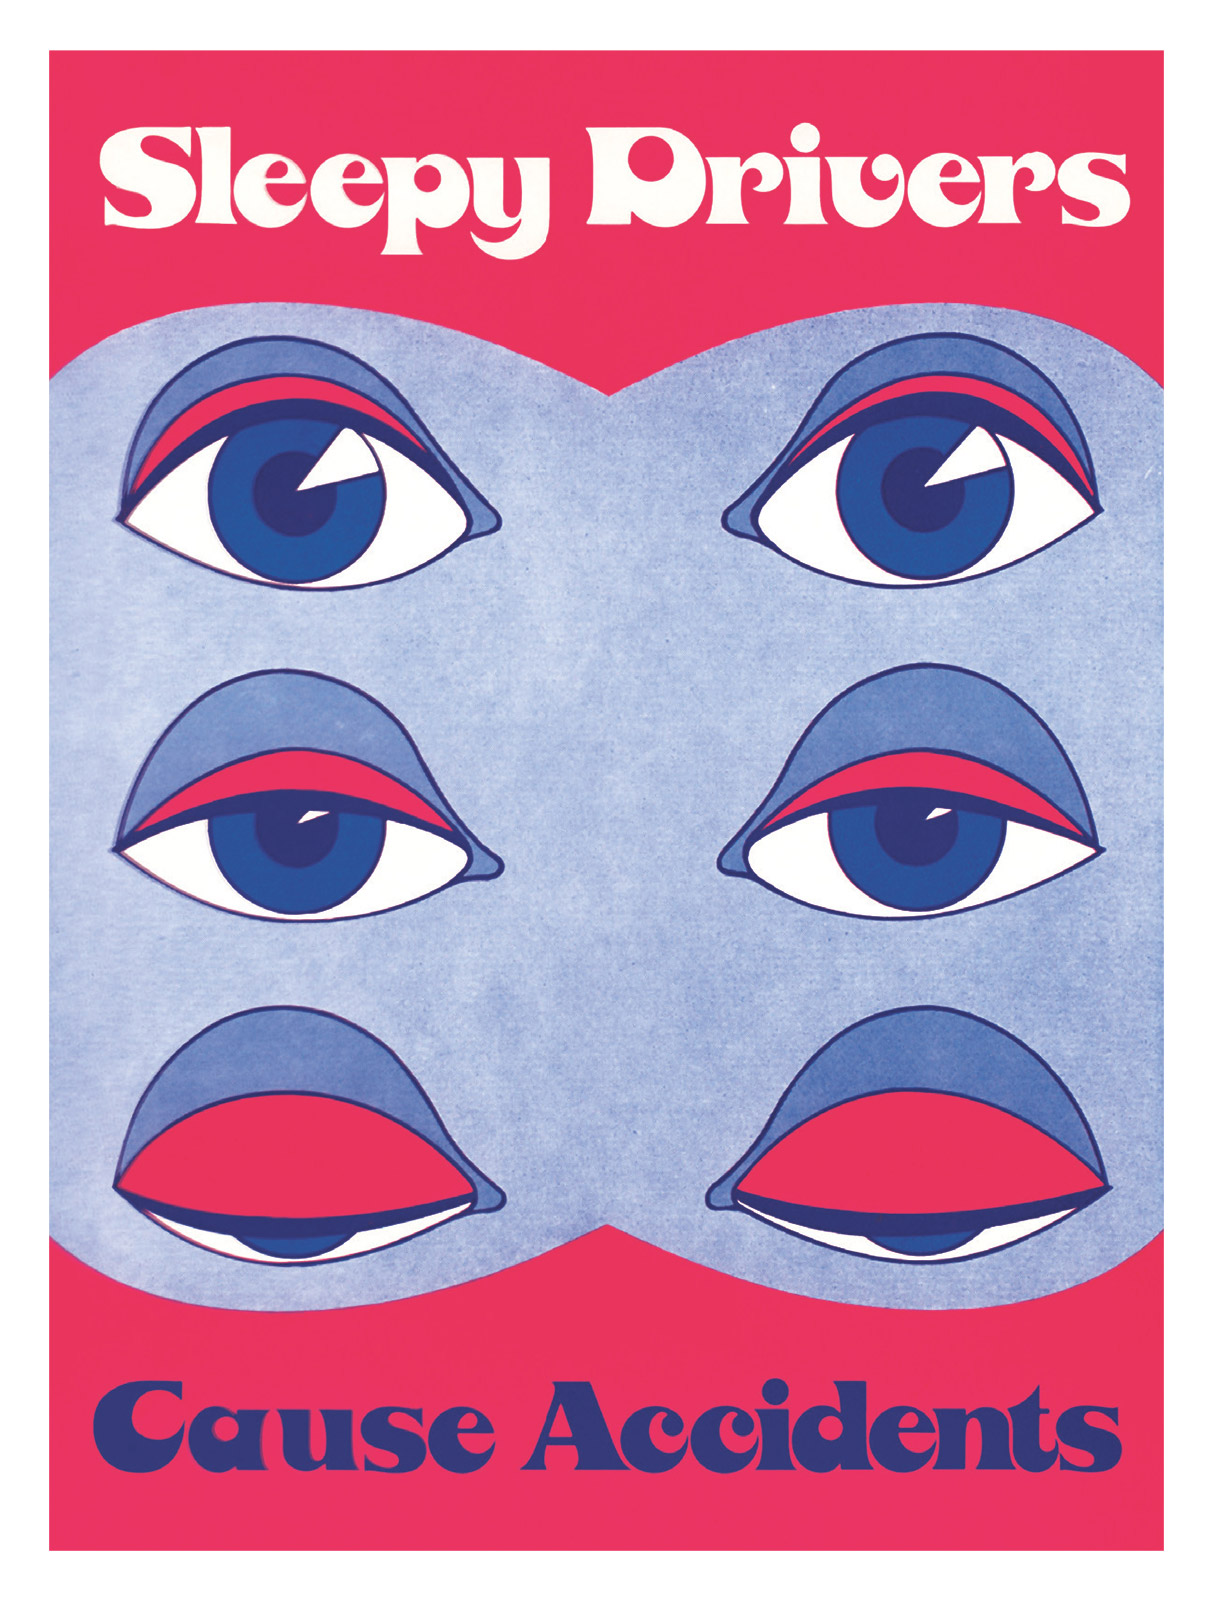 A postcard depicting a nineteen seventy-three US National Safety Council Poster of eyes drooping, with the caption “Sleepy Drivers Cause Accidents.”